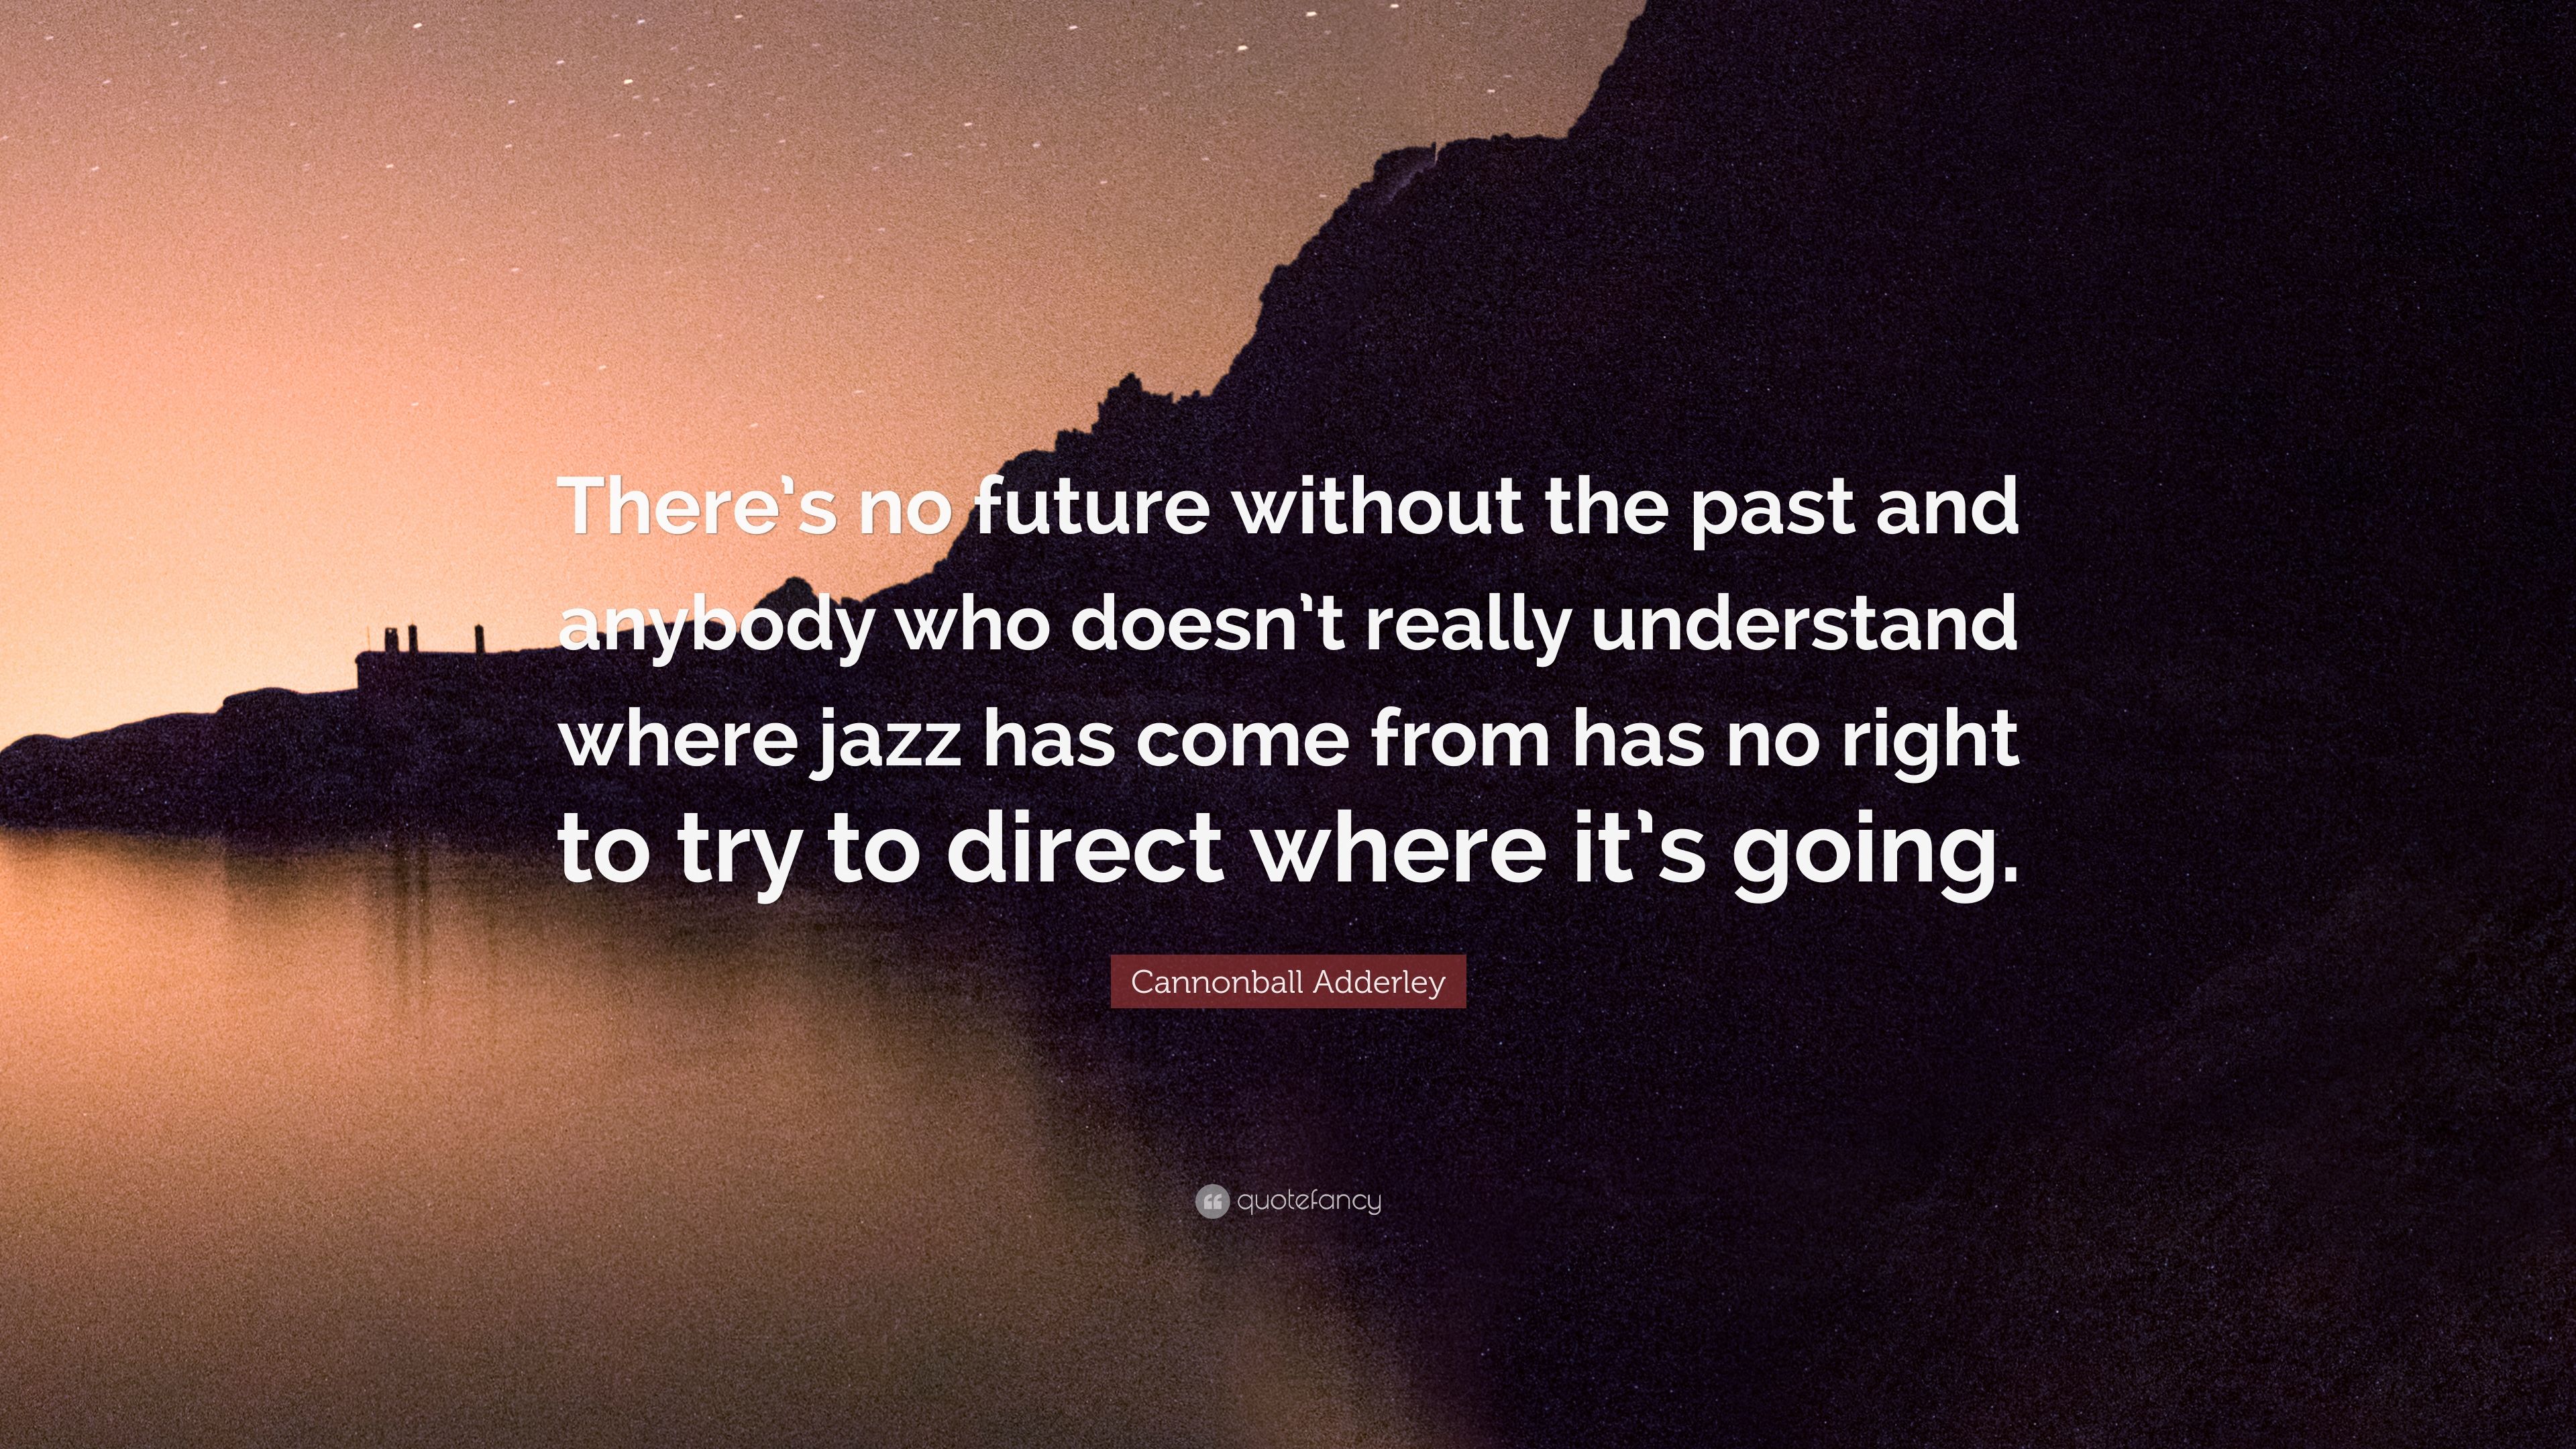 7 Cannonball Adderley Quotes About Life